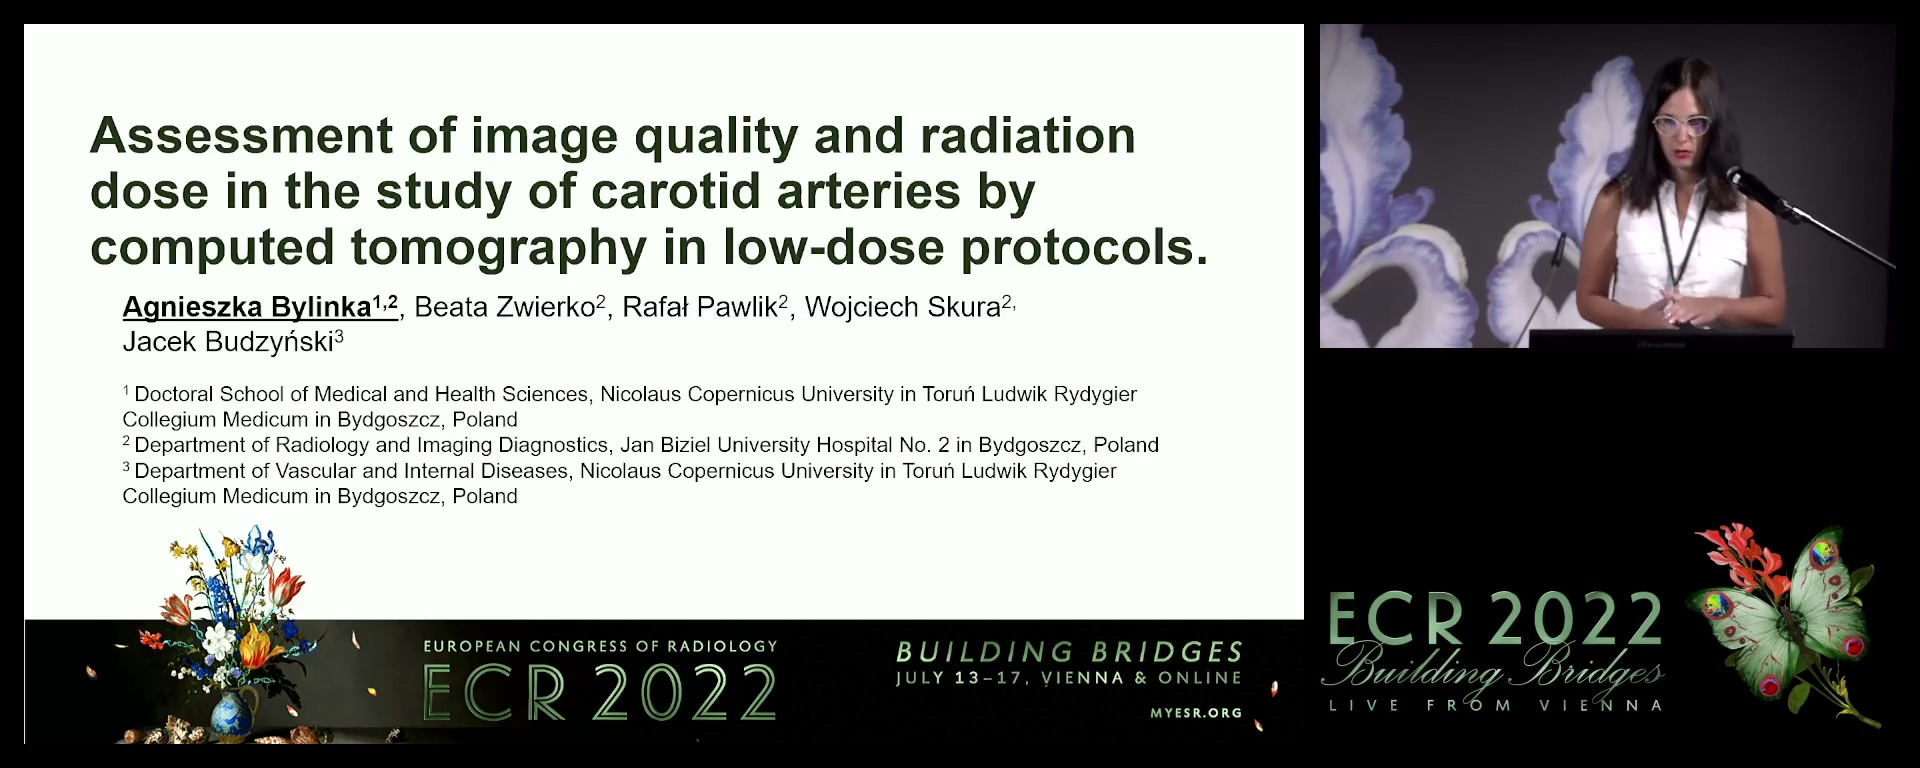 Assessment of image quality and radiation dose in the study of carotid arteries by computed tomography in low-dose protocols - Agnieszka Bylinka, Bydgoszcz / PL